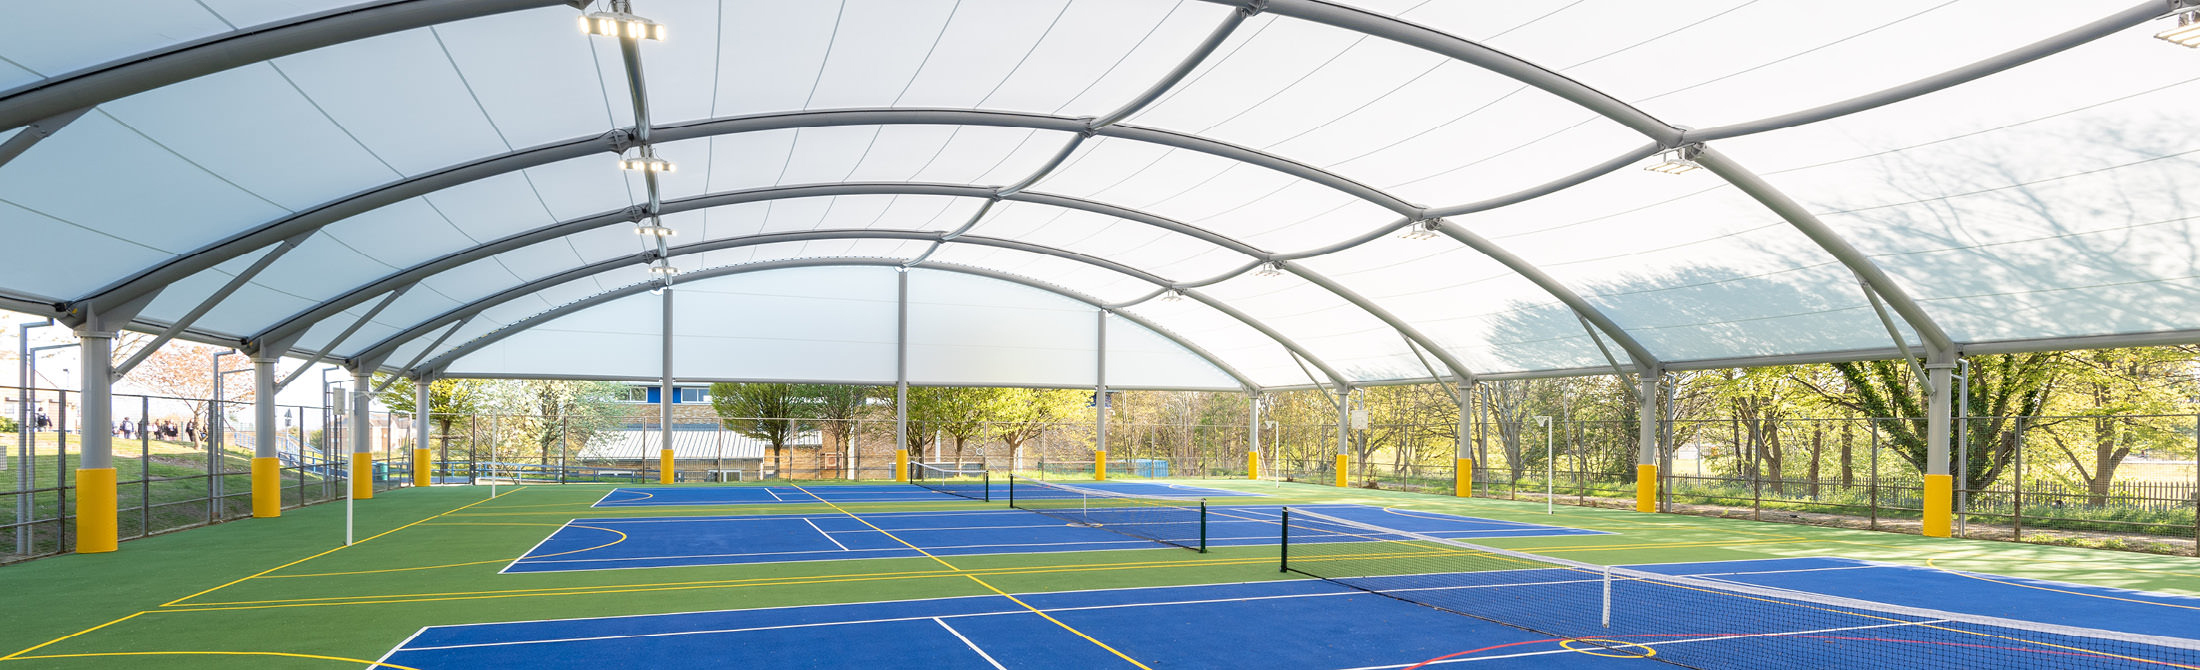 Sports canopy